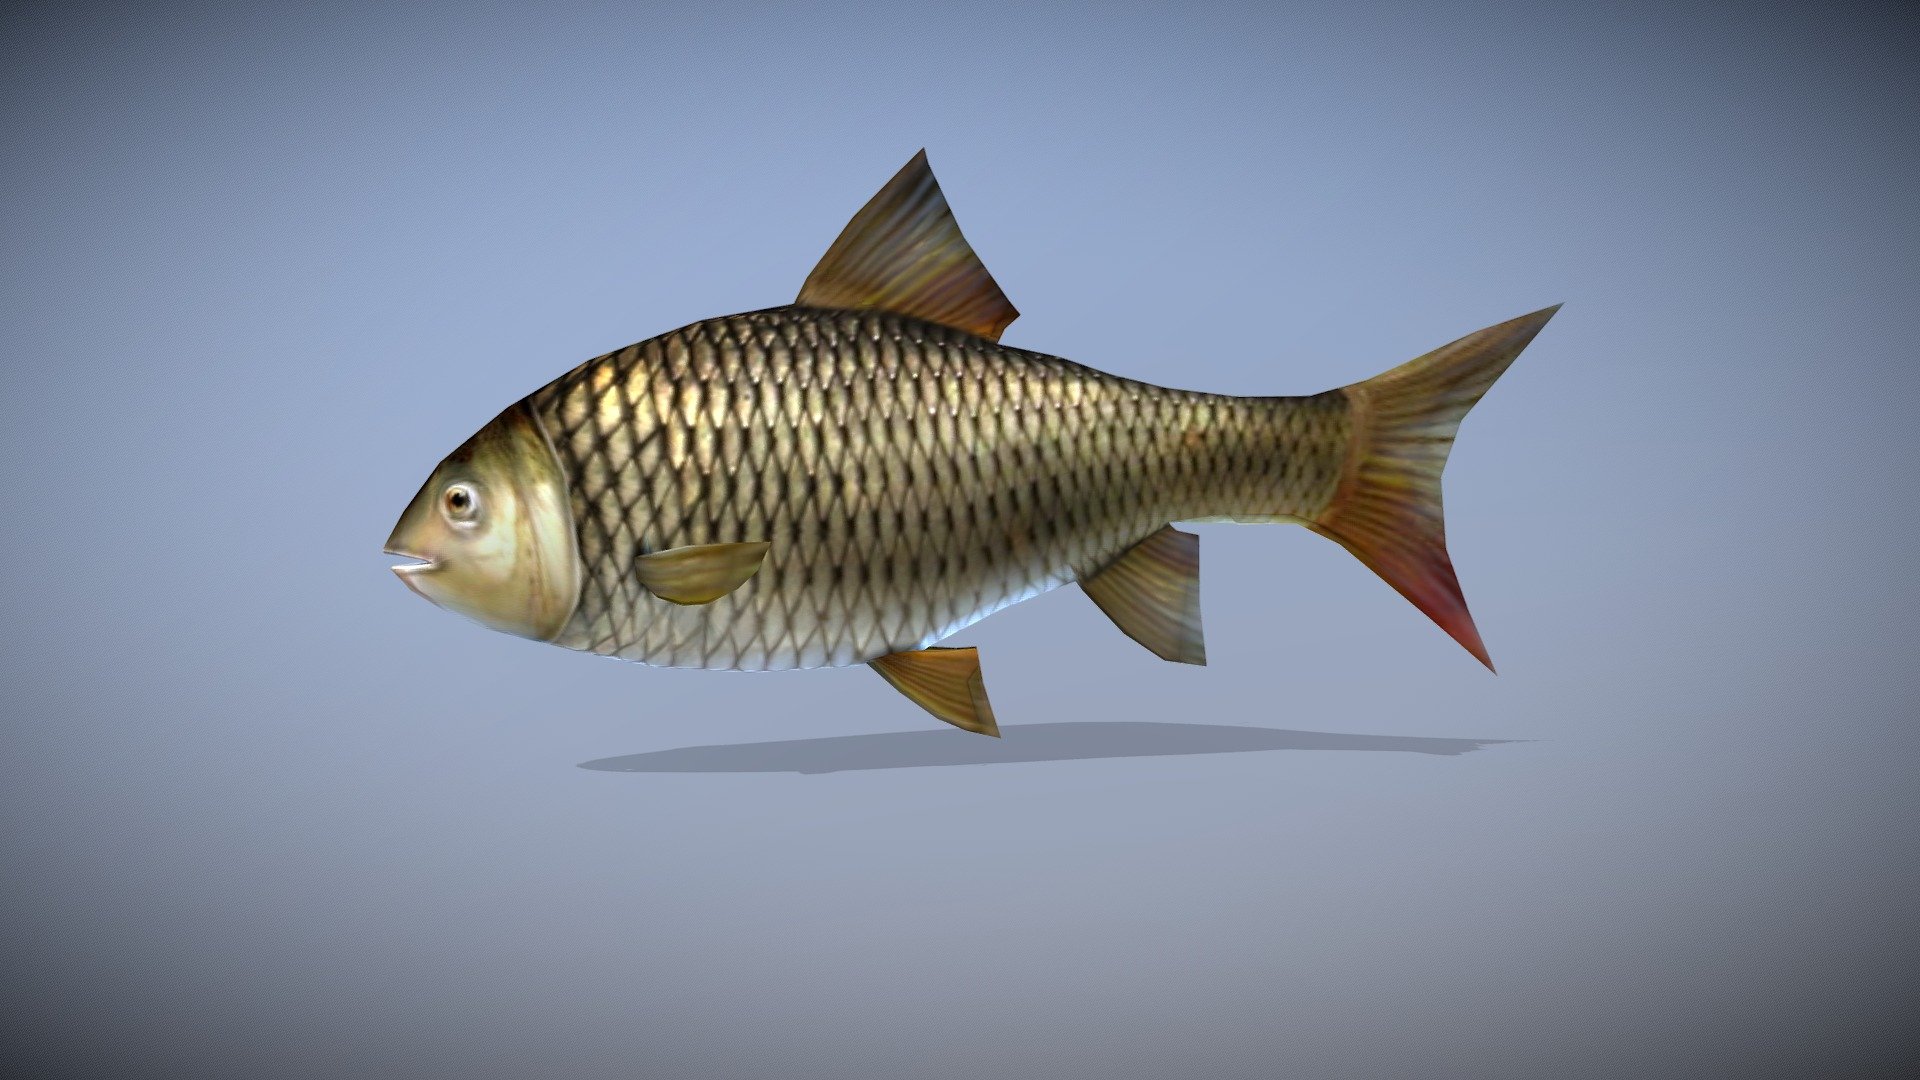 WATCH = https://youtu.be/kVv9IBM9F38
3D REALISTIC FISH WITH ANIMATIONS

PACKAGE INCLUDE
High quality model, correctly scaled for an accurate representation of the original object.
* High Detailed Photorealistic Wolf, completely UVmapped and smoothable.
* Model is built to real-world scale.
* Many different format like blender, fbx, obj, iclone, dae
* 3d print ready in different poses
* Separate Loopable Animations
* Ready for animation
* High Quality materials and textures
* Triangles = 856
* Vertices = 430
* Edges = 1284
* Faces = 856

ANIMATIONS

IDLE SWIM
FAST SWIM
SLOW SWIM
JUMP
+Many different 3d Print Poses

NOTE

GIVE CREDIT BILAL CREATION PRODUCTION
SUBSCRIBE YOUTUBE CHANNEL = https://www.youtube.com/BilalCreation/playlists
FOLLOW OUR STORE = https://sketchfab.com/bilalcreation/models
LIKE AND GIVE FEEDBACK ON THE MODEL

CONTACT US                 =  https://sites.google.com/view/bilalcreation/contact-us
ORDER  DONATION   =  https://sites.google.com/view/bilalcreation/order - FISH ANIMATED - Buy Royalty Free 3D model by Bilal Creation Production (@bilalcreation) 3d model